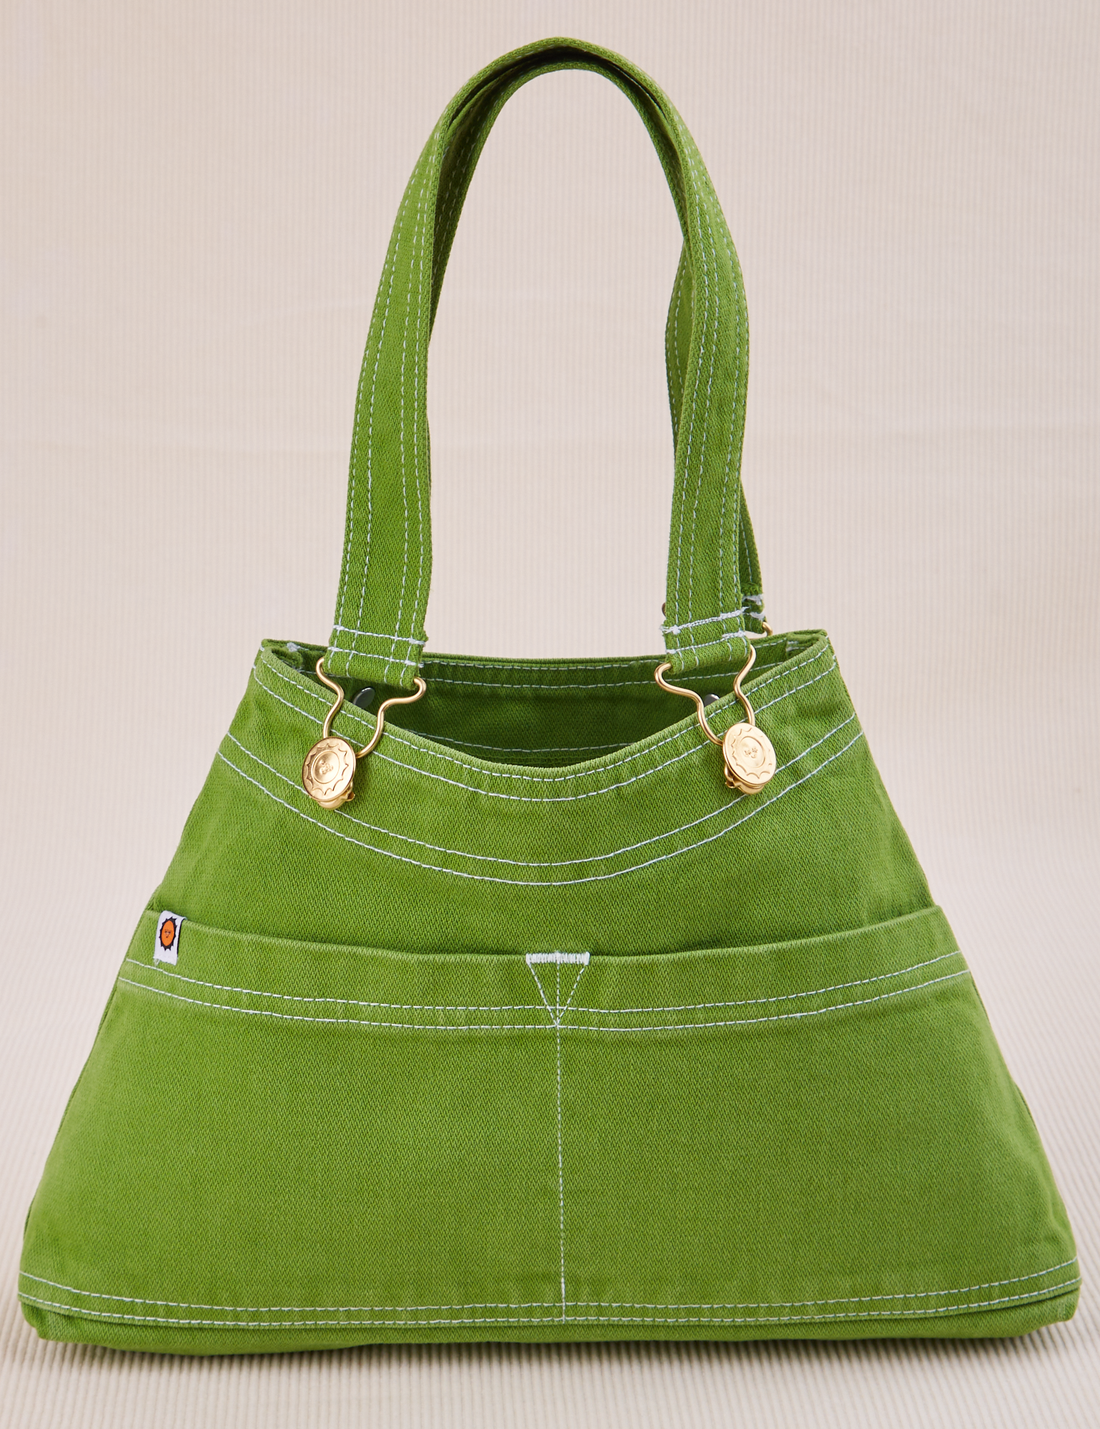 Overall Handbag in Bright Olive with handle straps standing up